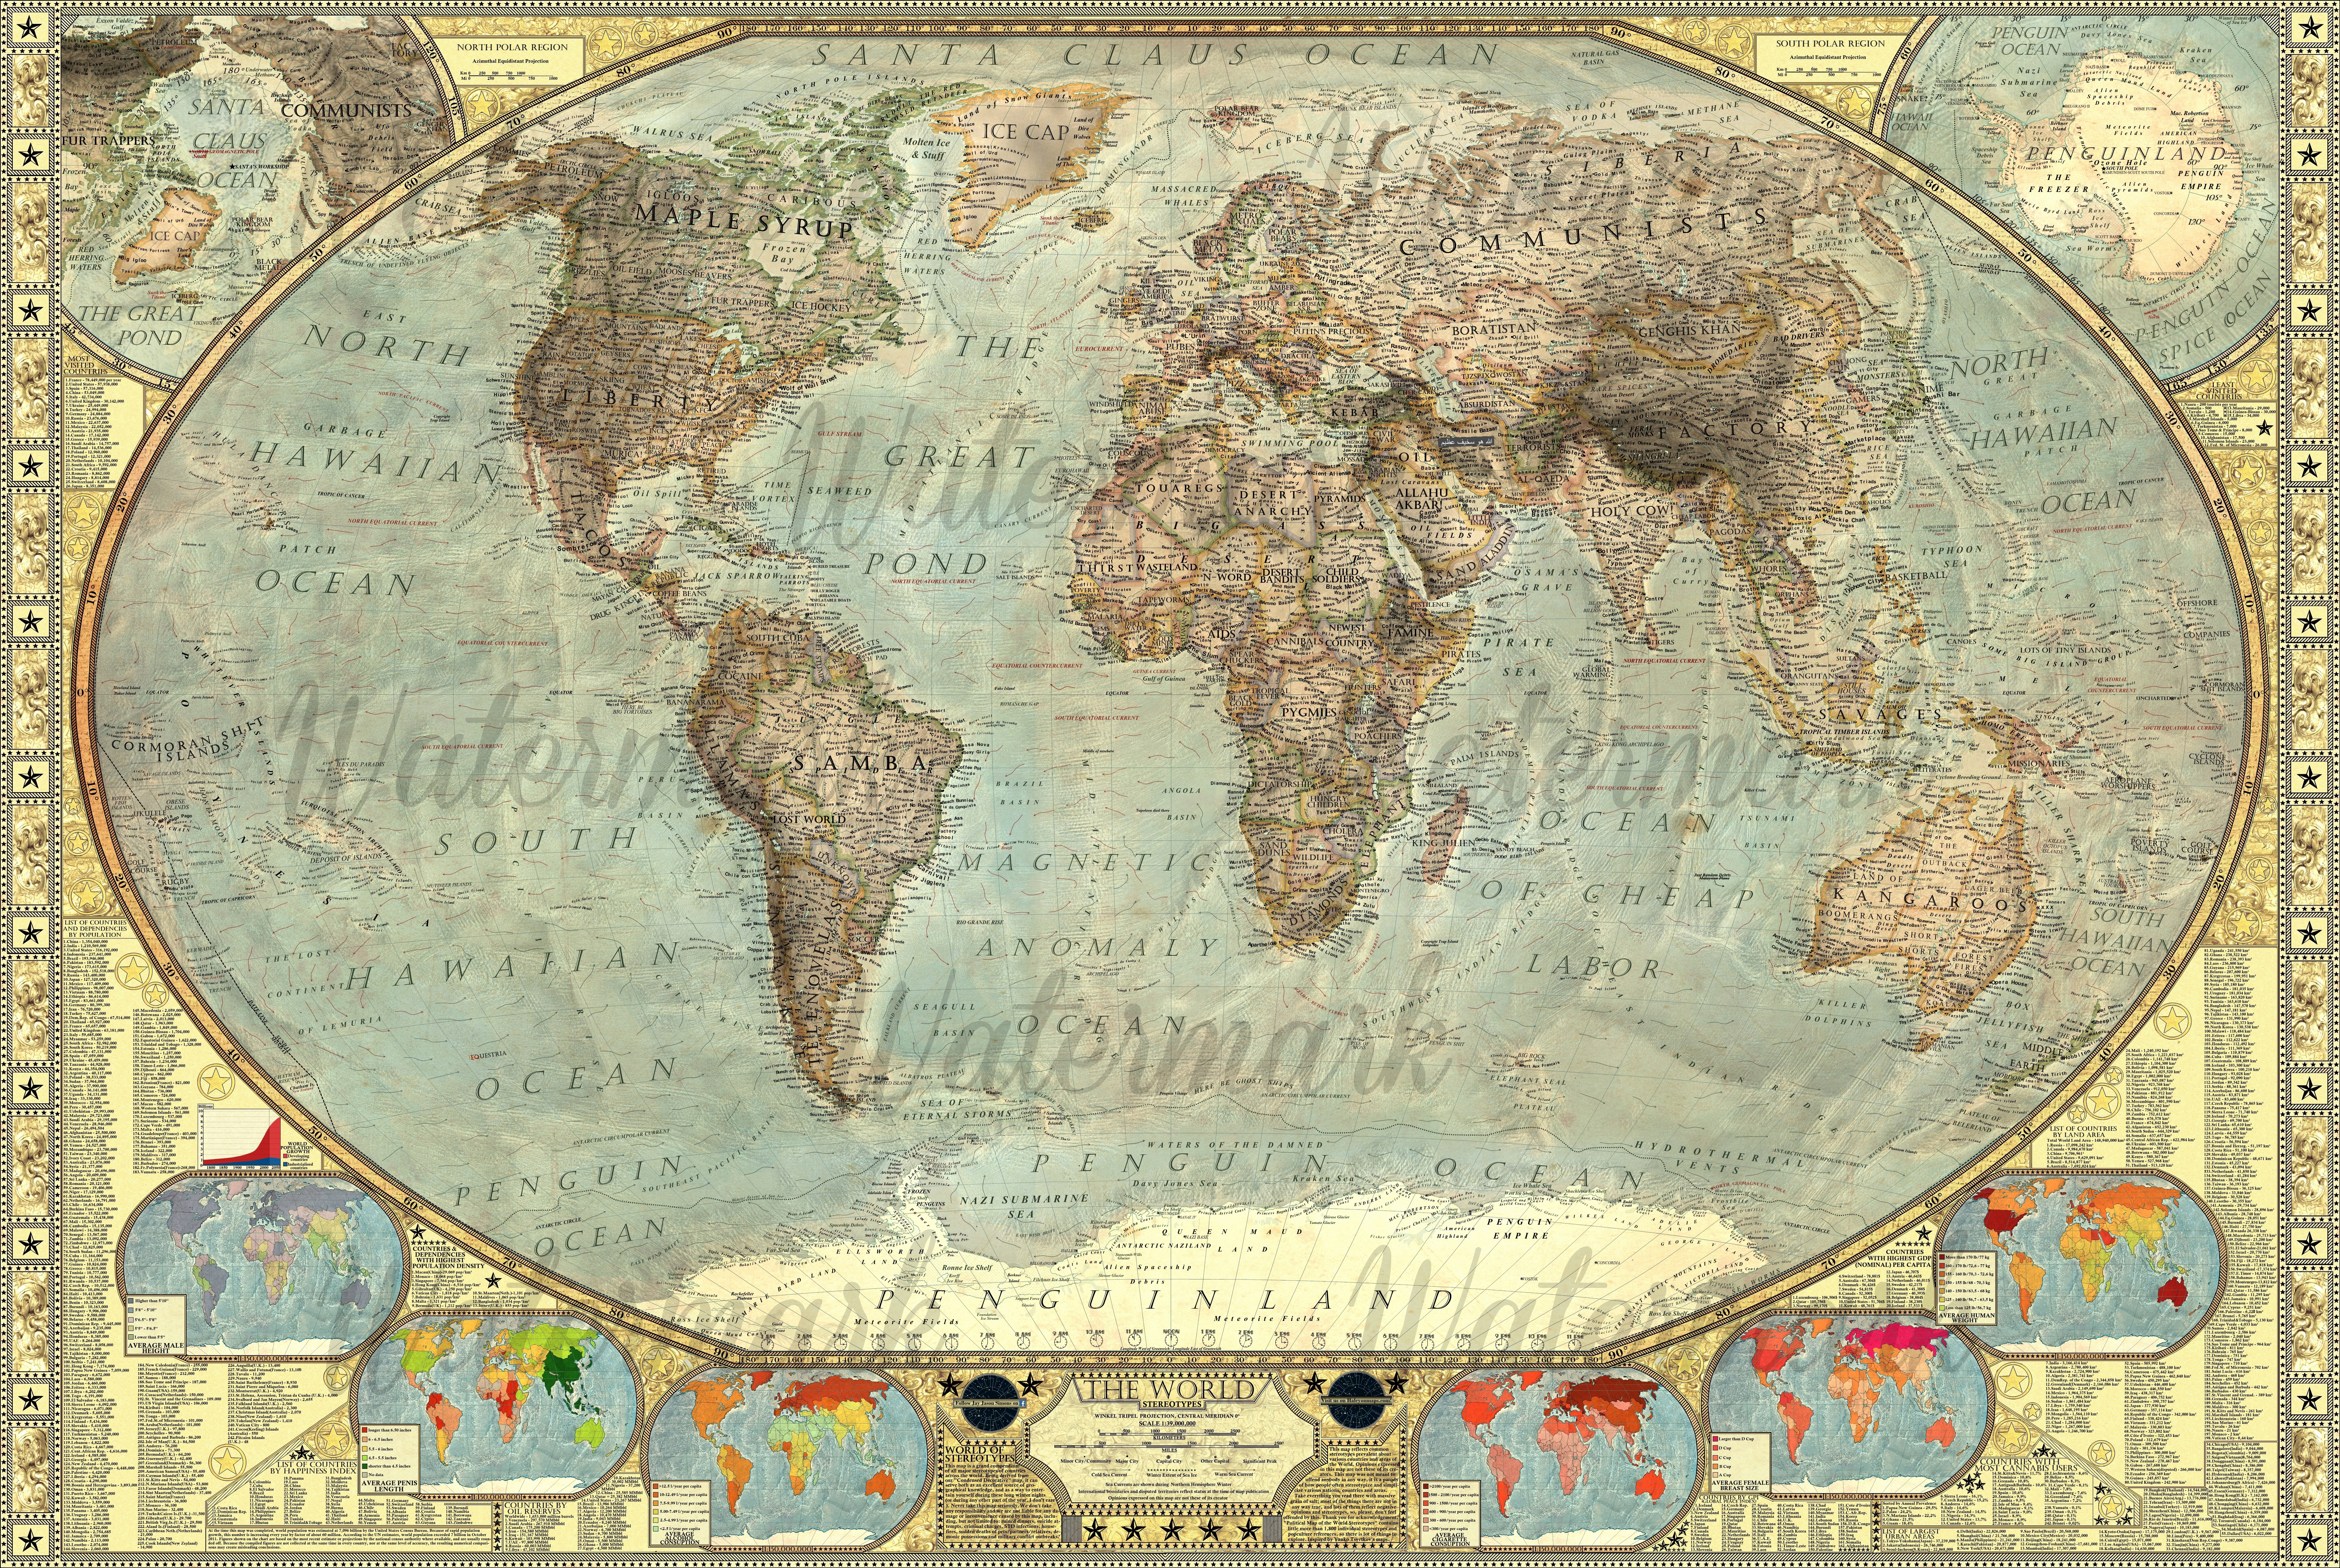 map_of_the_world_stereotypes_by_jaysimons-d7jiuq7.png